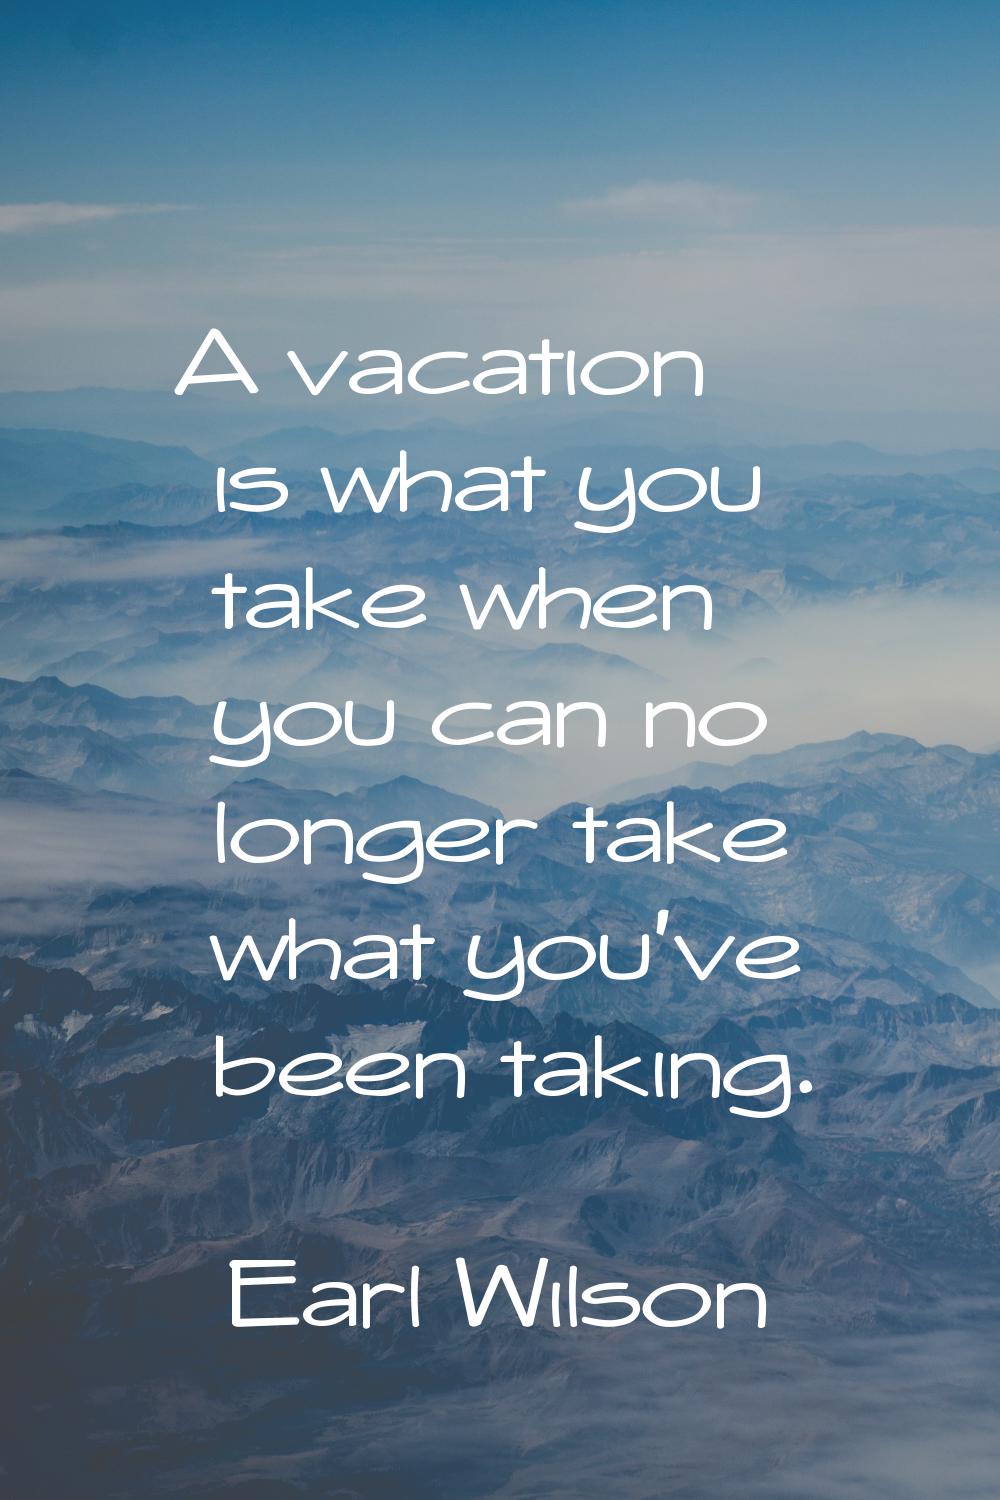 A vacation is what you take when you can no longer take what you've been taking.